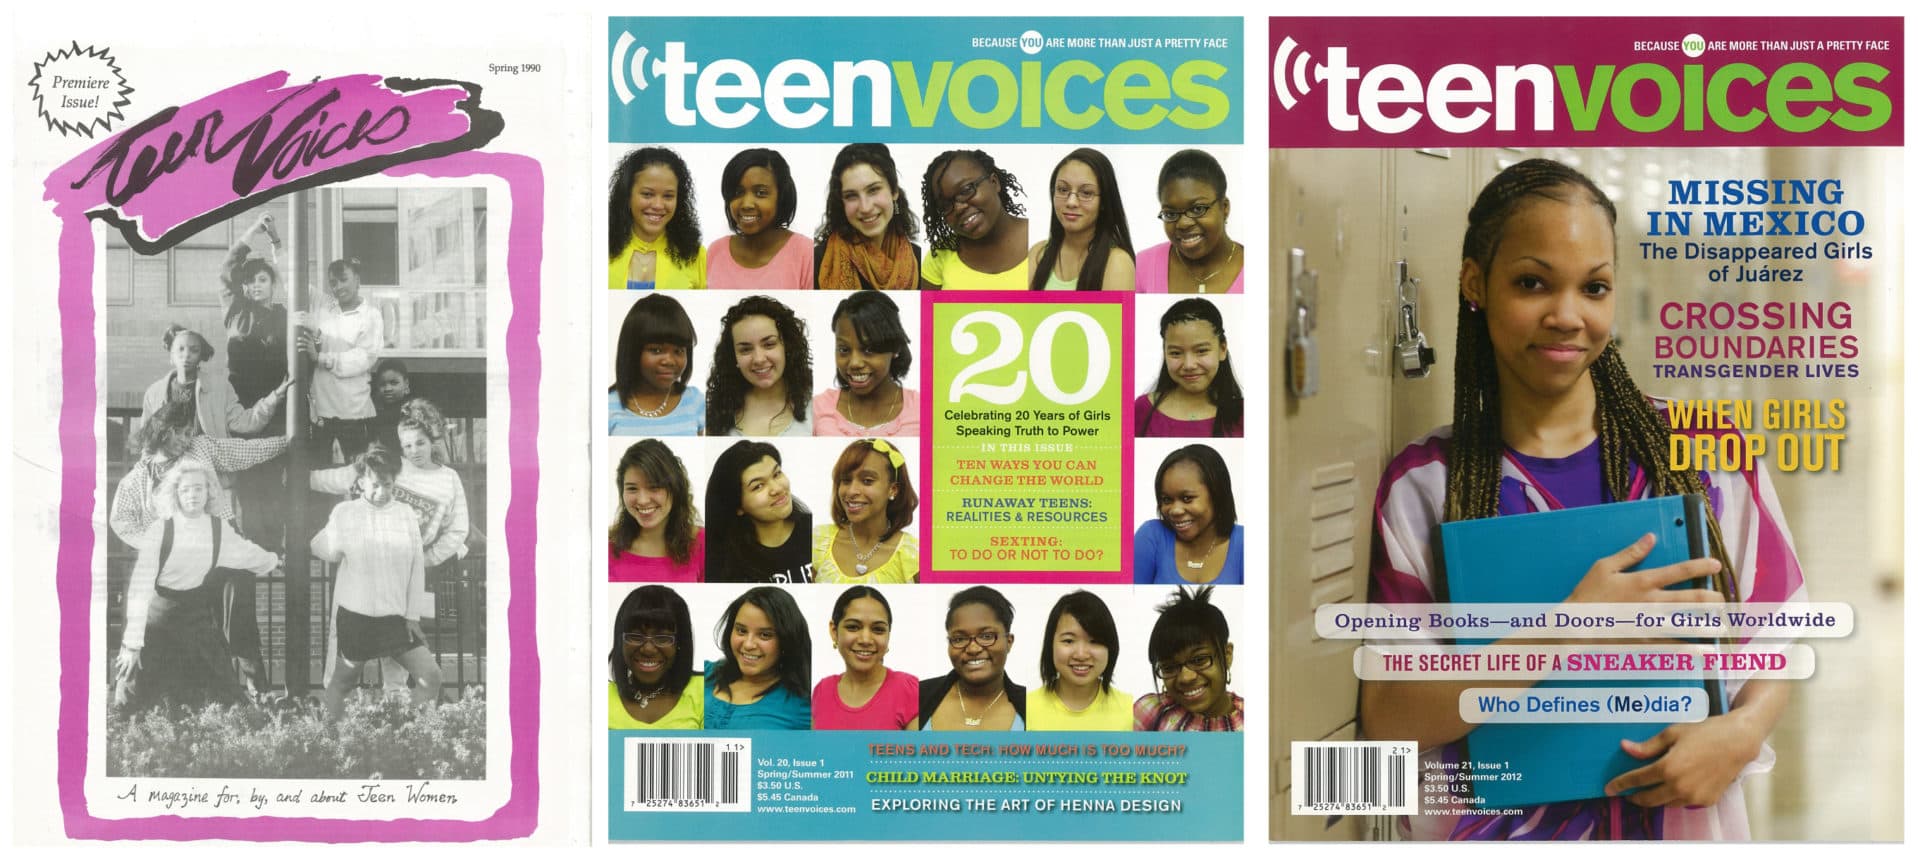 Teen Voices began as a newsprint 'zine and evolved into a glossy magazine with international contributors and readers. (Courtesy Teen Voices Legacy Project)